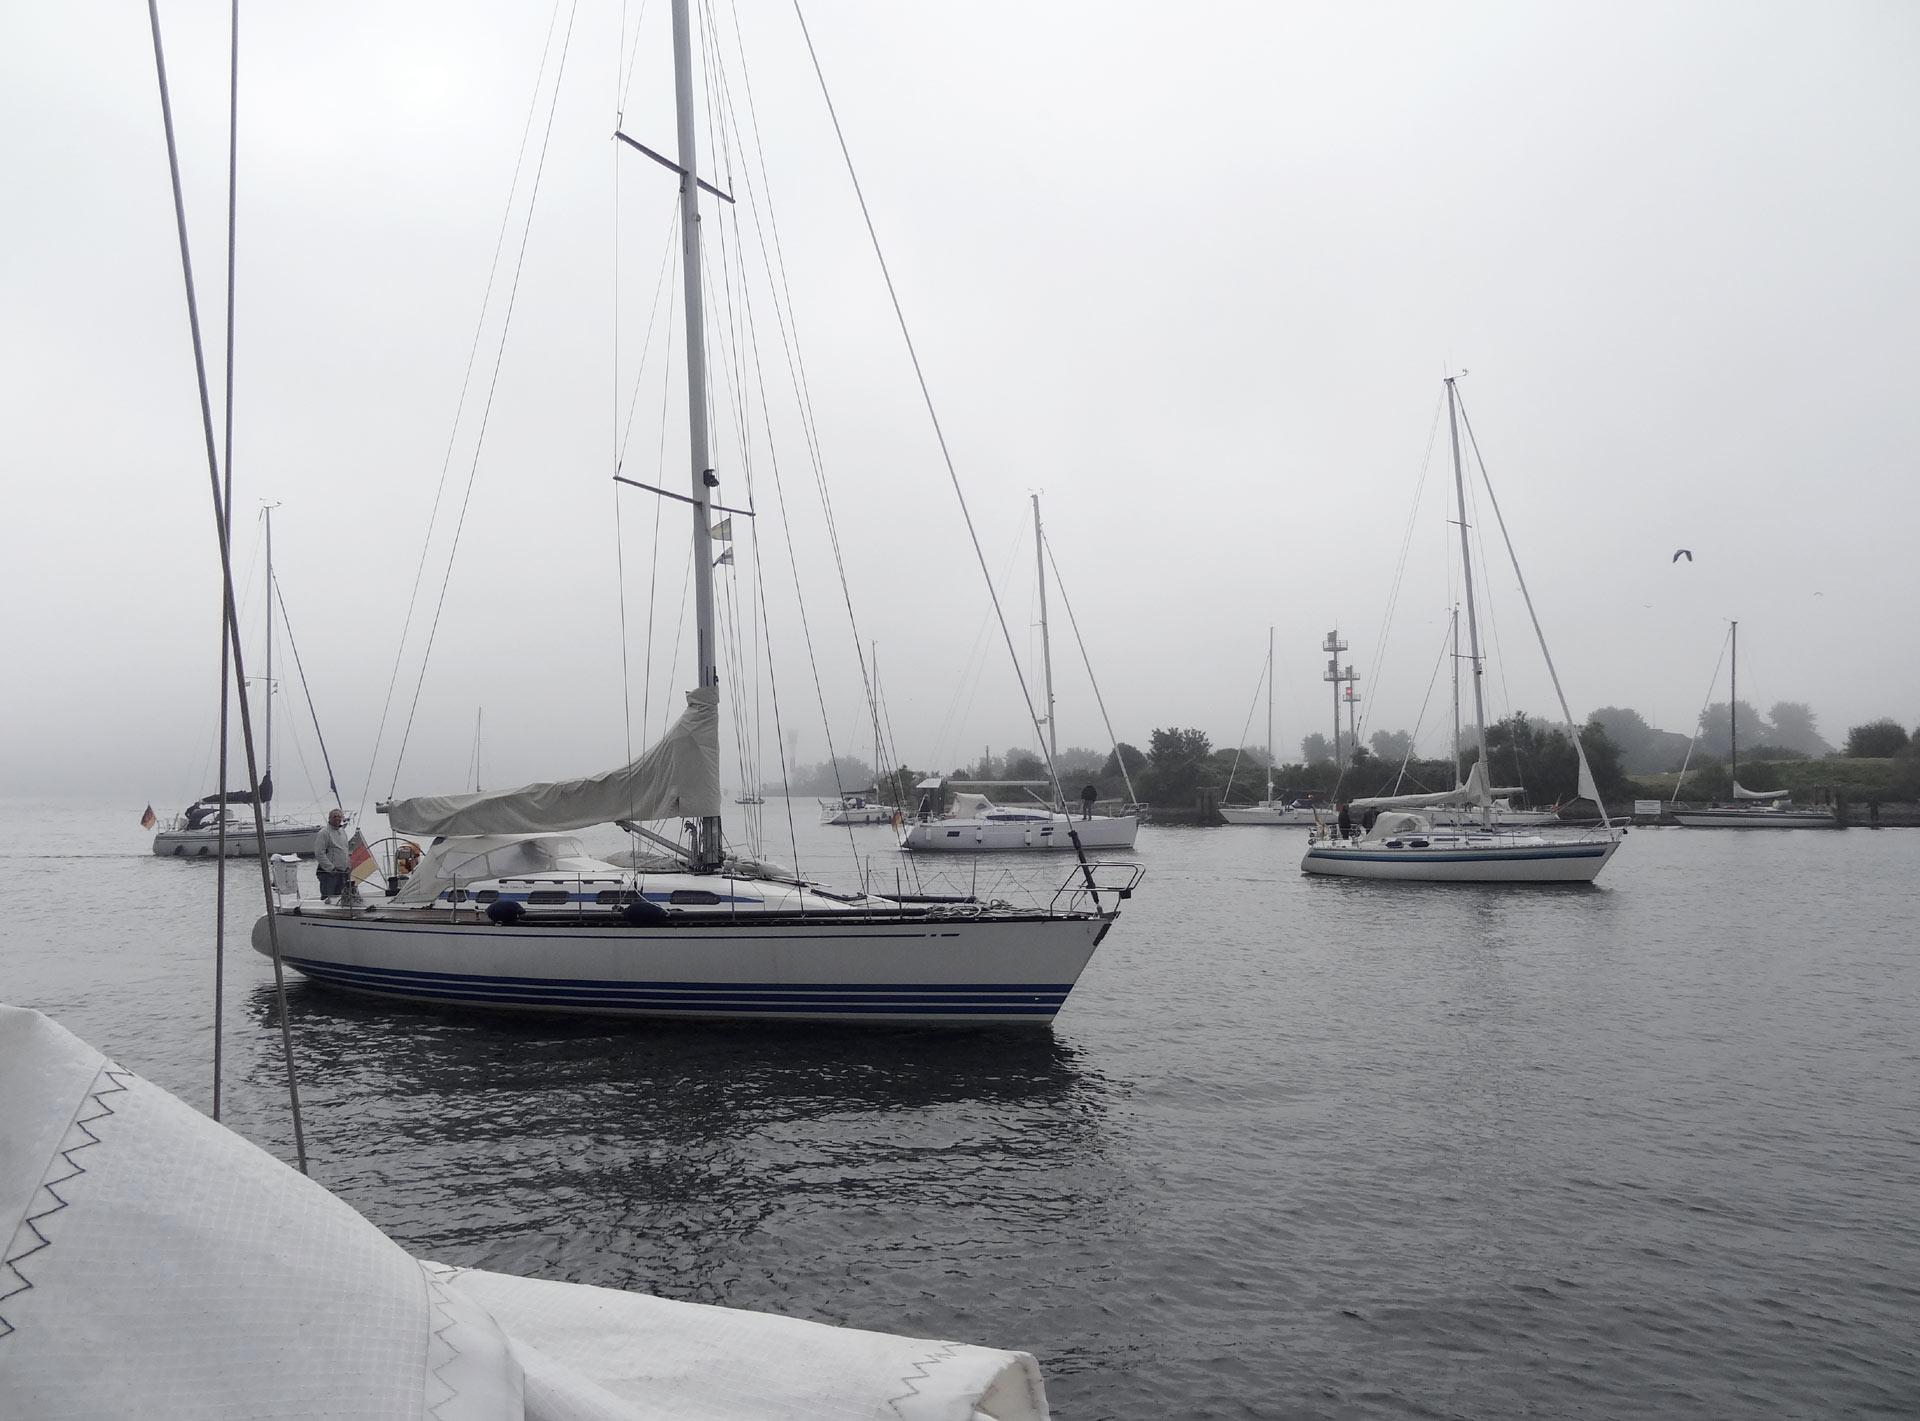 Boats are heading for safe mooring due to arriving fog.